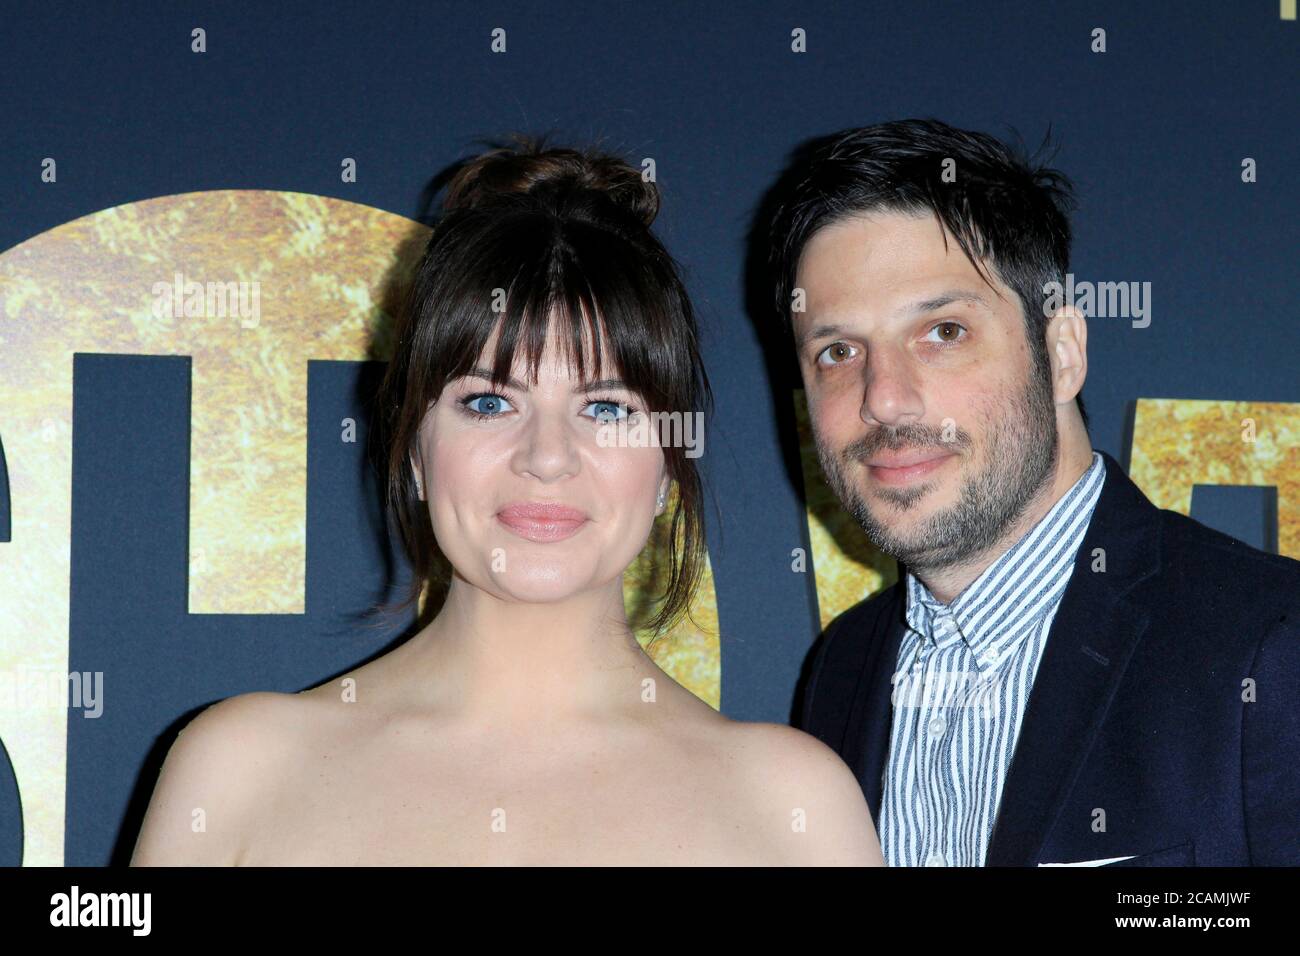 LOS ANGELES - JAN 5:  Casey Wilson, David Caspe at the Showtime Golden Globe Nominees Celebration at the Sunset Tower Hotel on January 5, 2019 in West Hollywood, CA Stock Photo